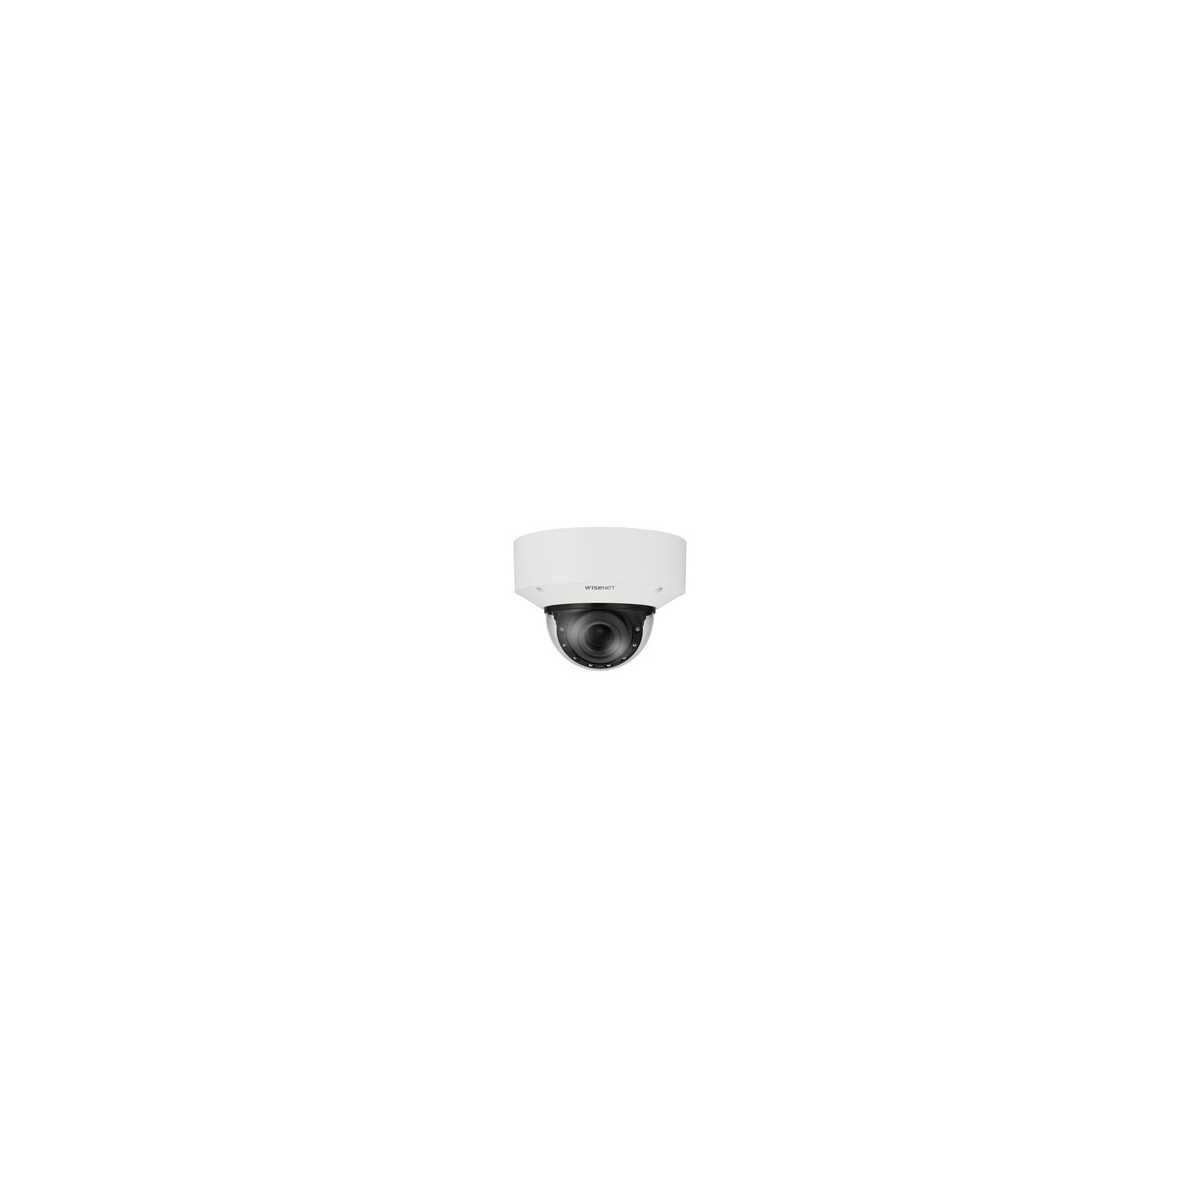 Hanwha Techwin Hanwha XNV-C6083R - IP security camera - Indoor  outdoor - Wired - 150 dB - Ceiling - White